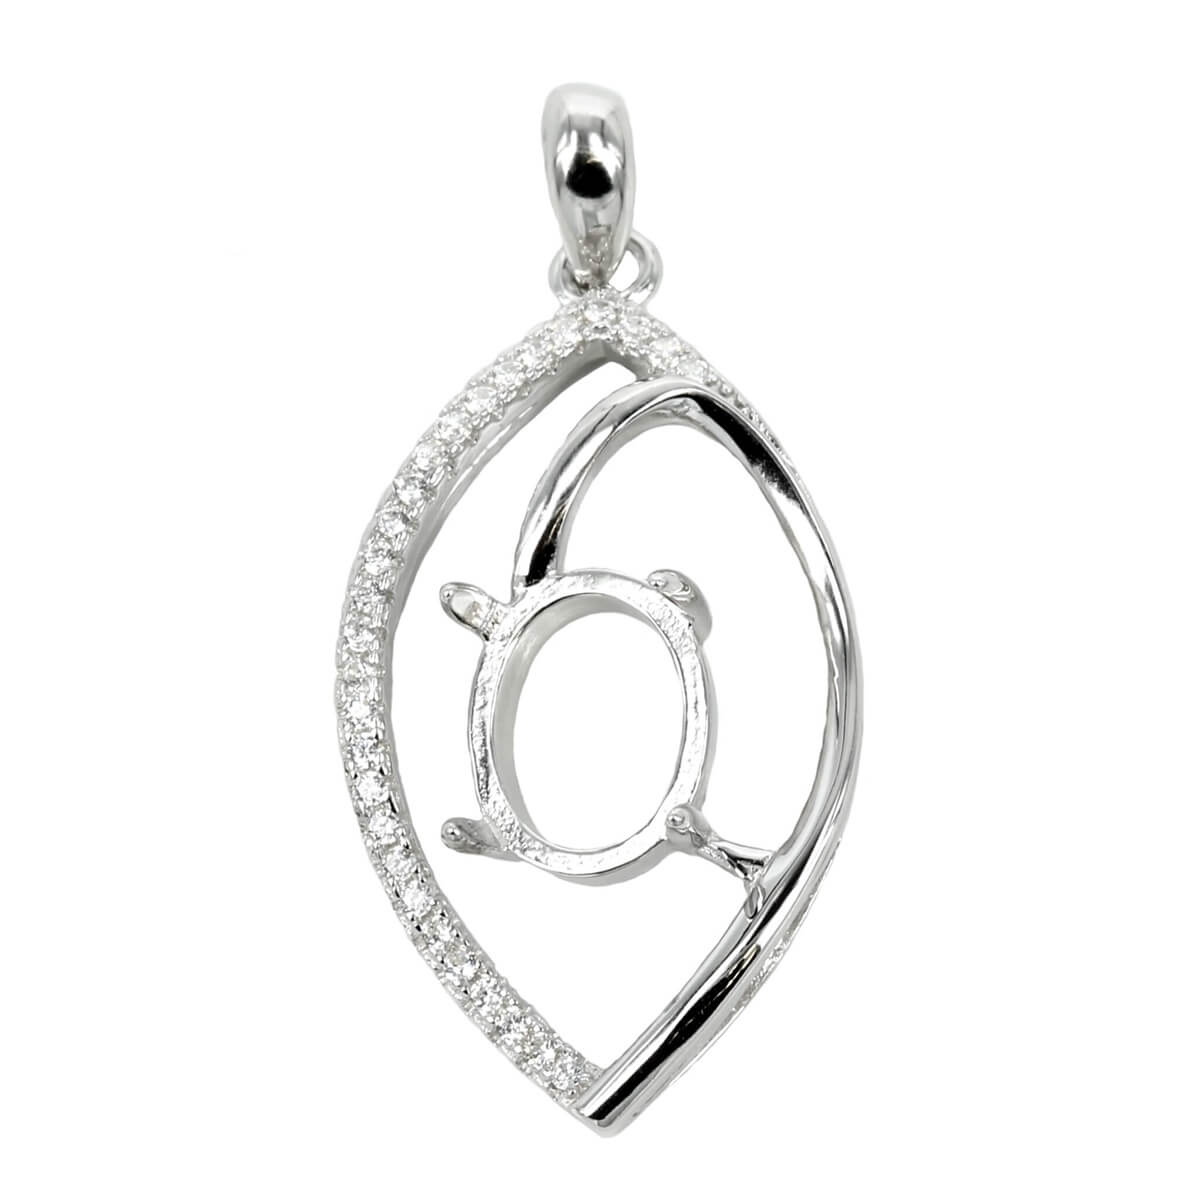 Oval Cubic Zirconia Set Biconvex Pendant with Soldered Loop and Bail in Sterling Silver 7x9mm 